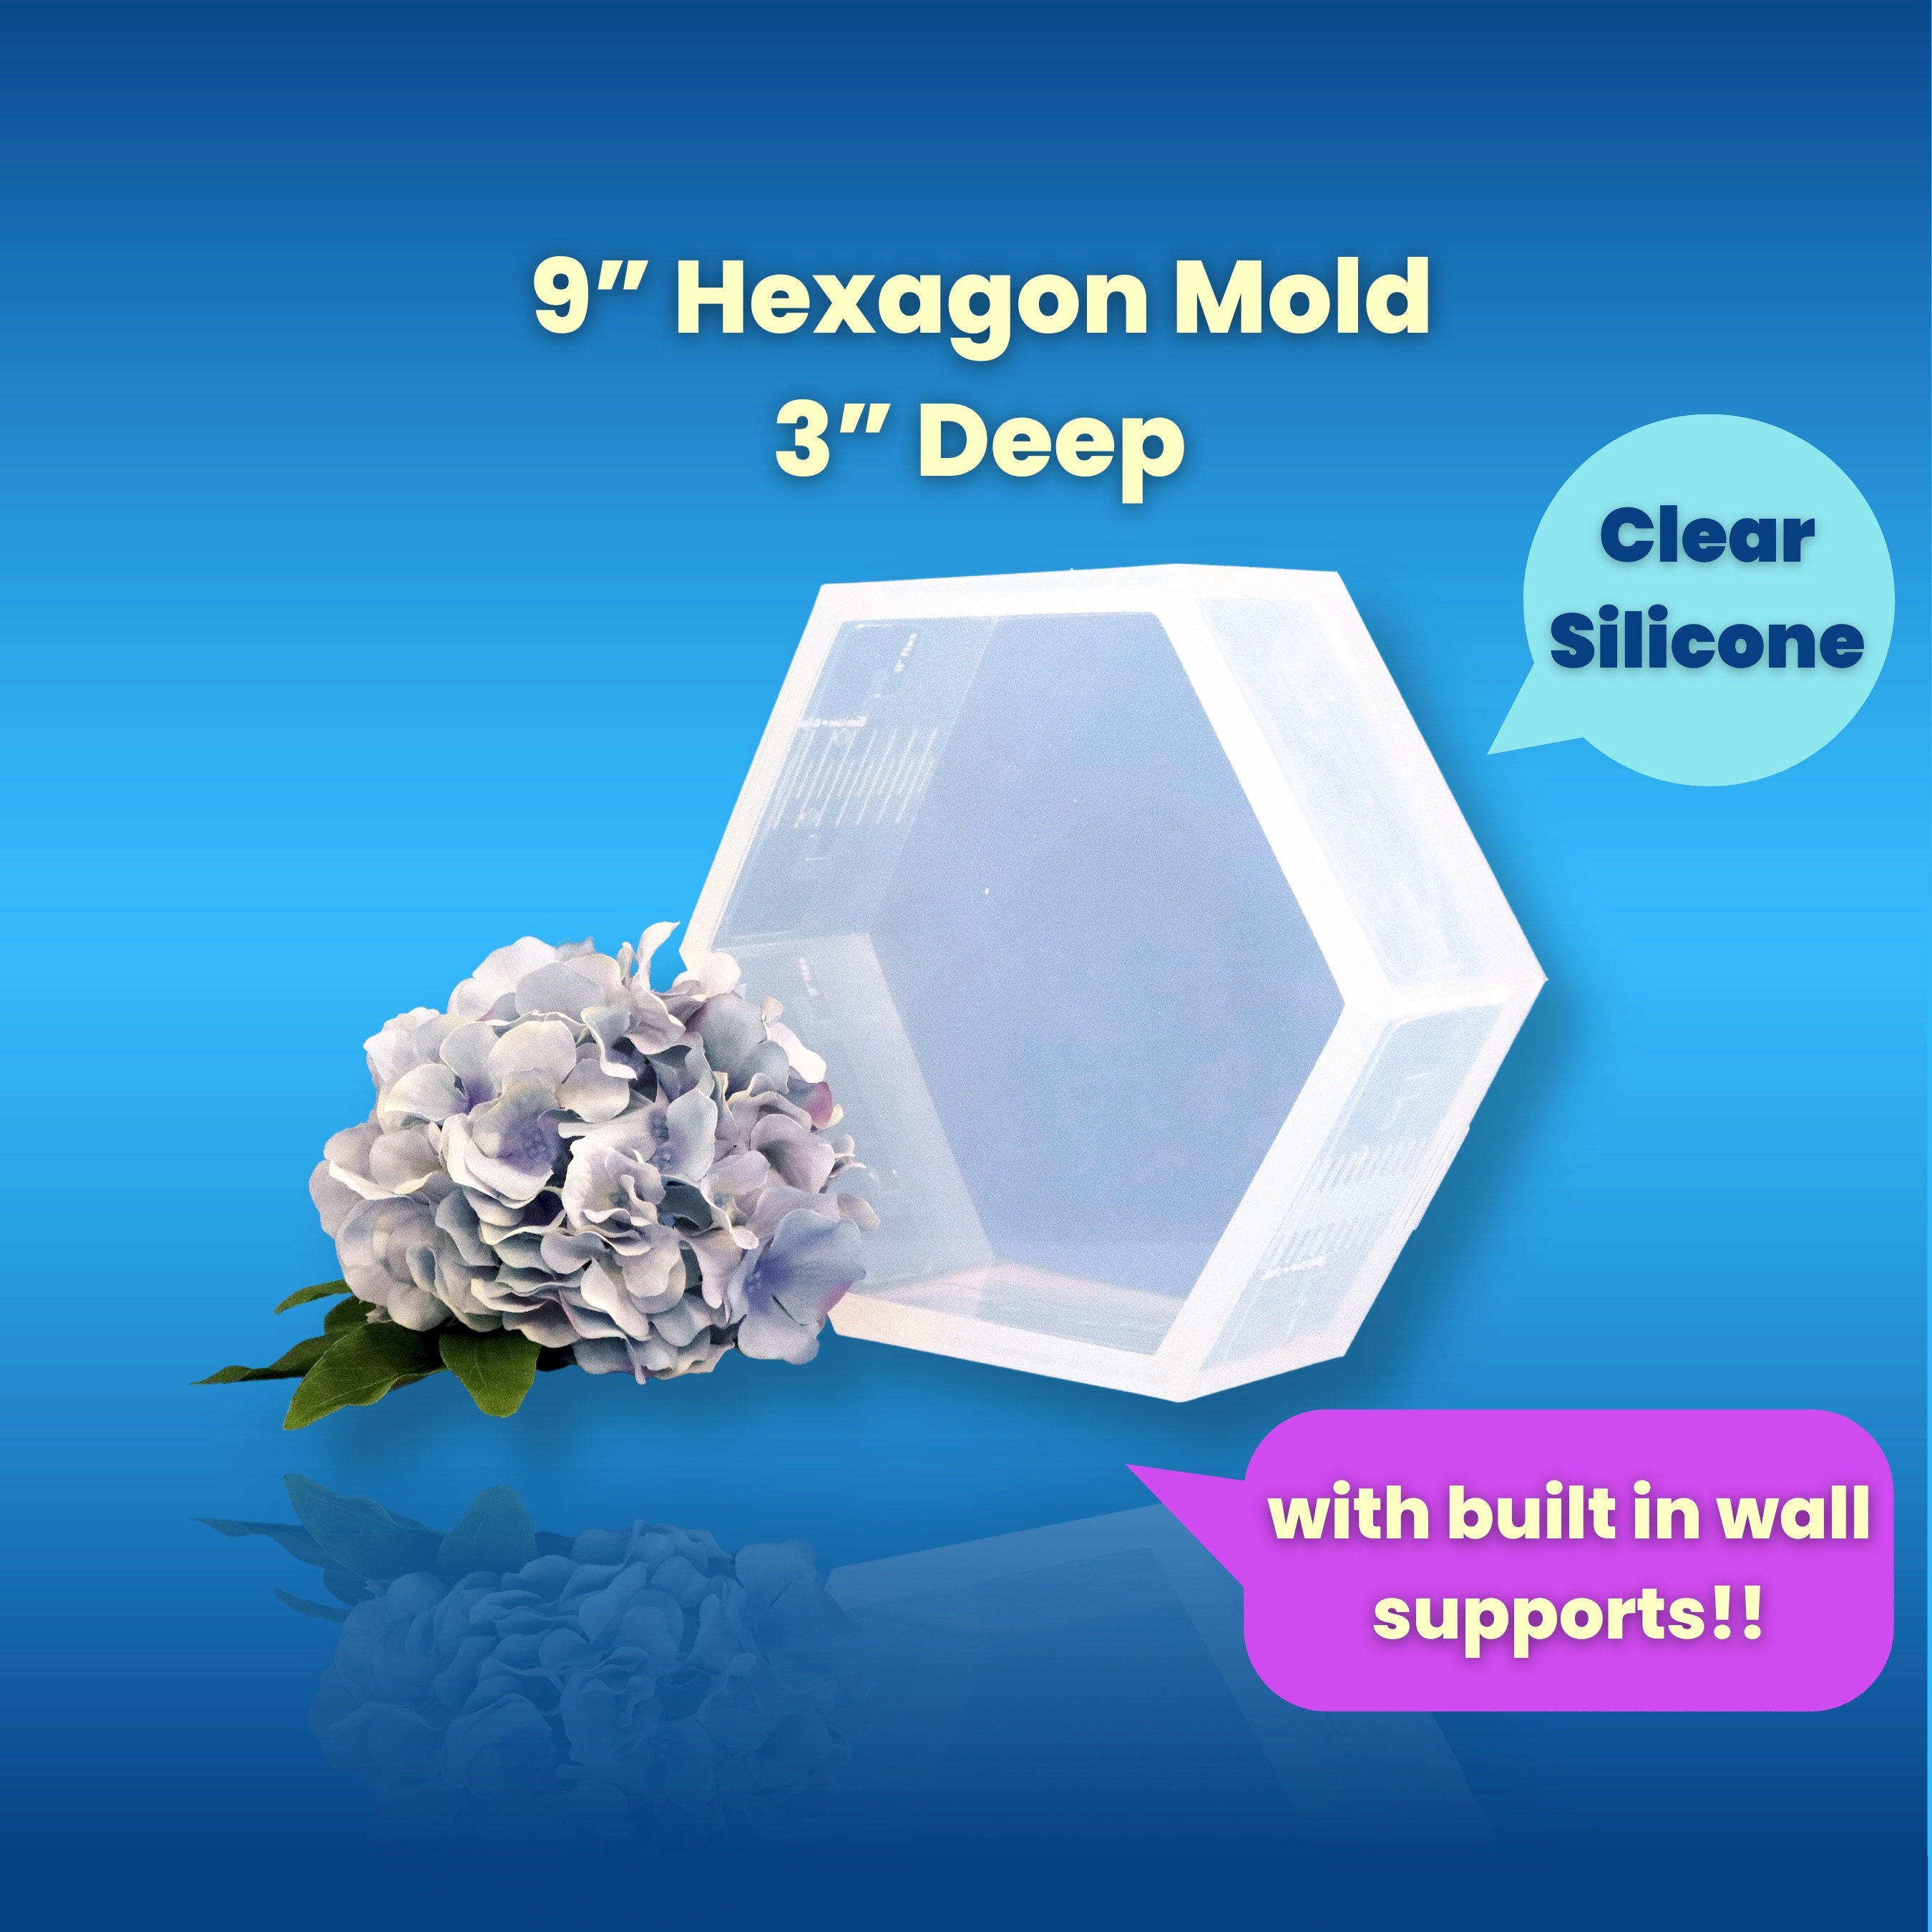 2 Inch Holographic Diamond Shape Earrings Silicone Mold for Resin Casting 